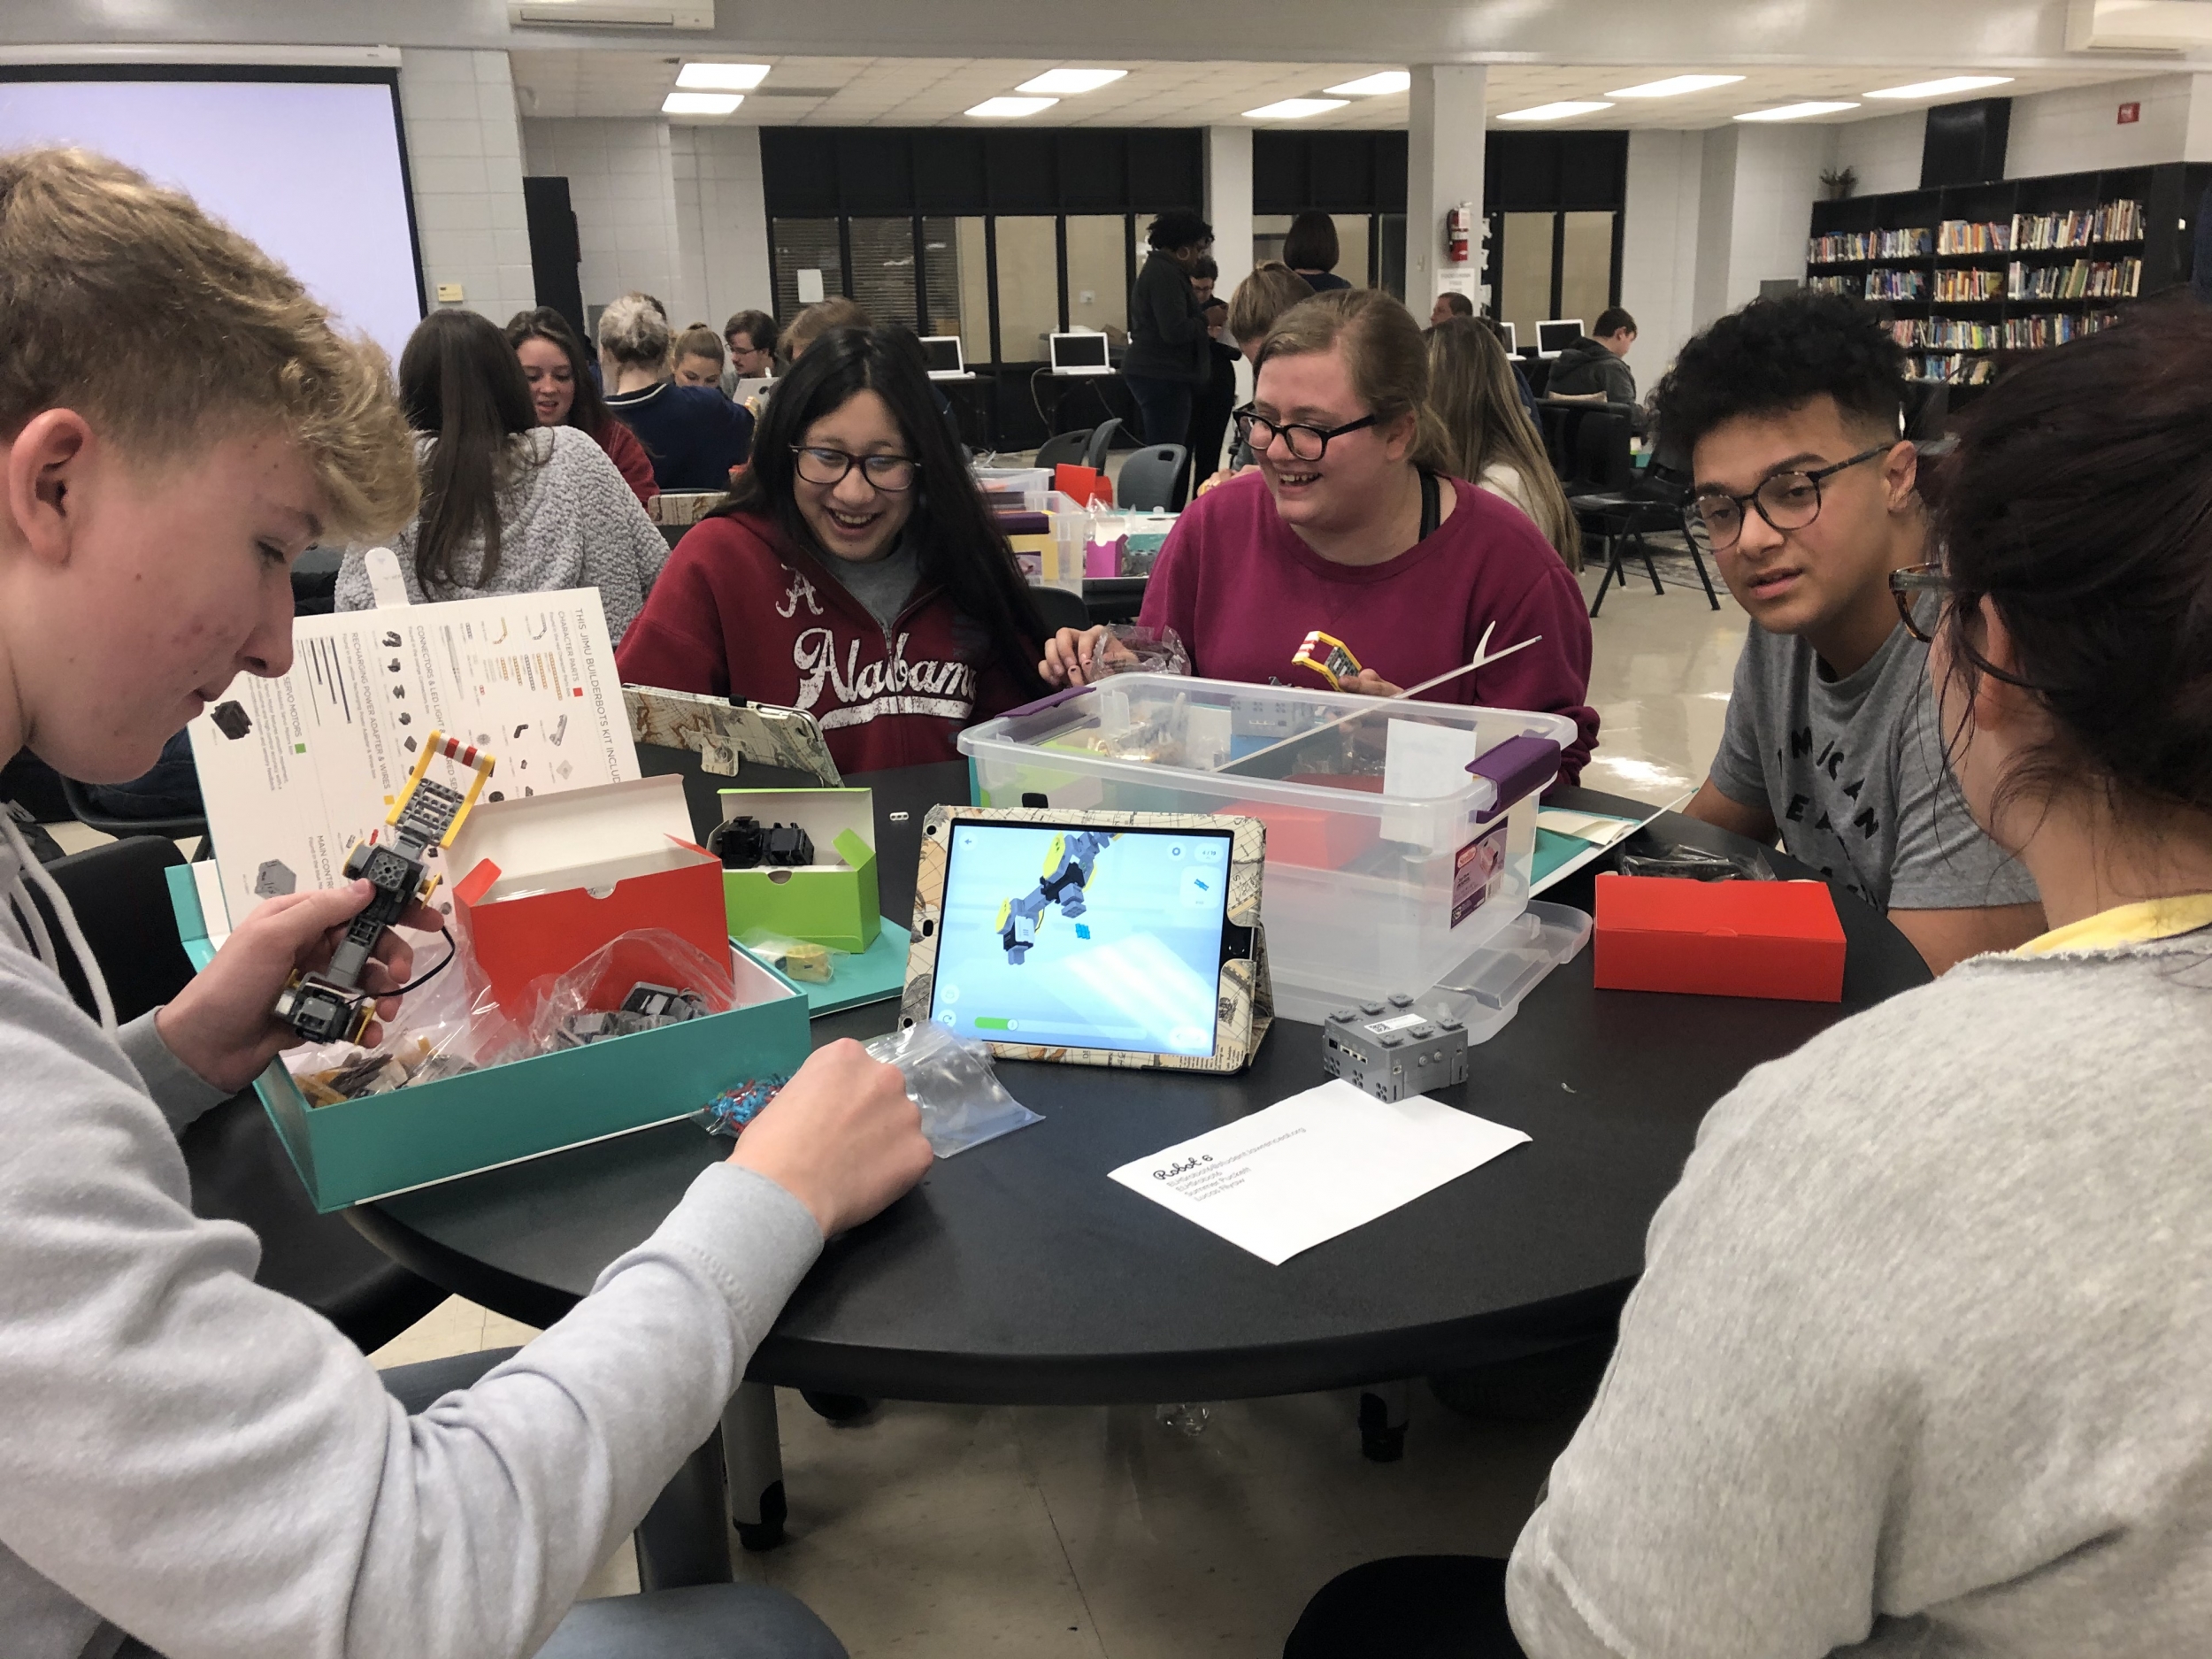 A group of five high school students sit at a table, smiling, working together to assemble a robot out of what look to be lego-like parts. 